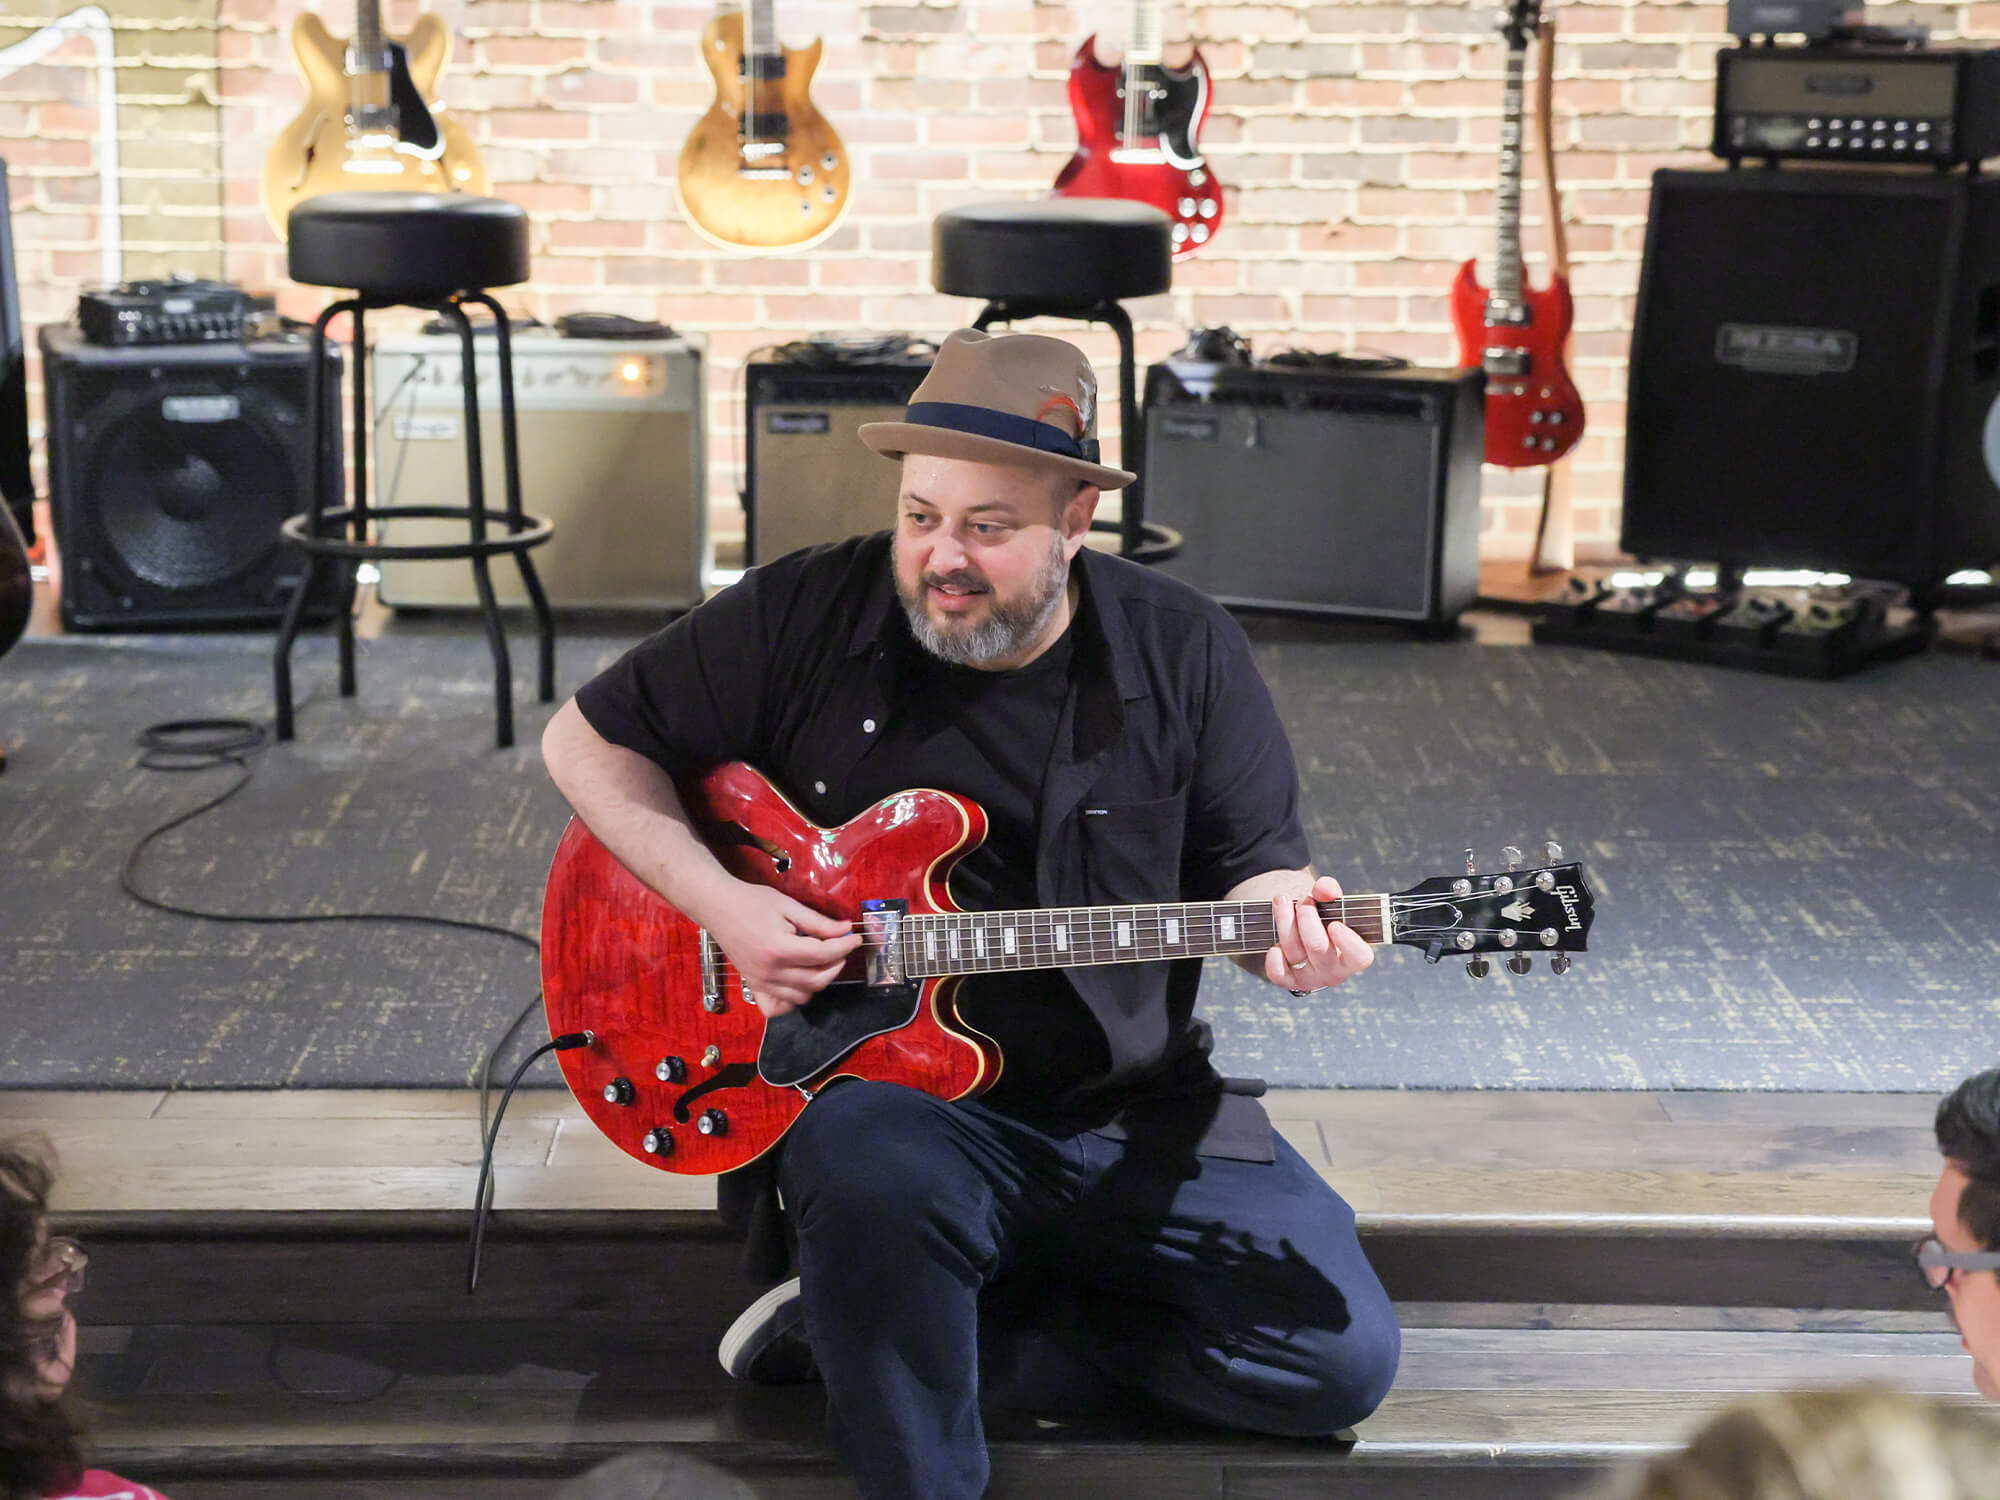 Marty Schwartz with his red Epiphone. He's sitting on some steps and appears to be teaching a small crowd.